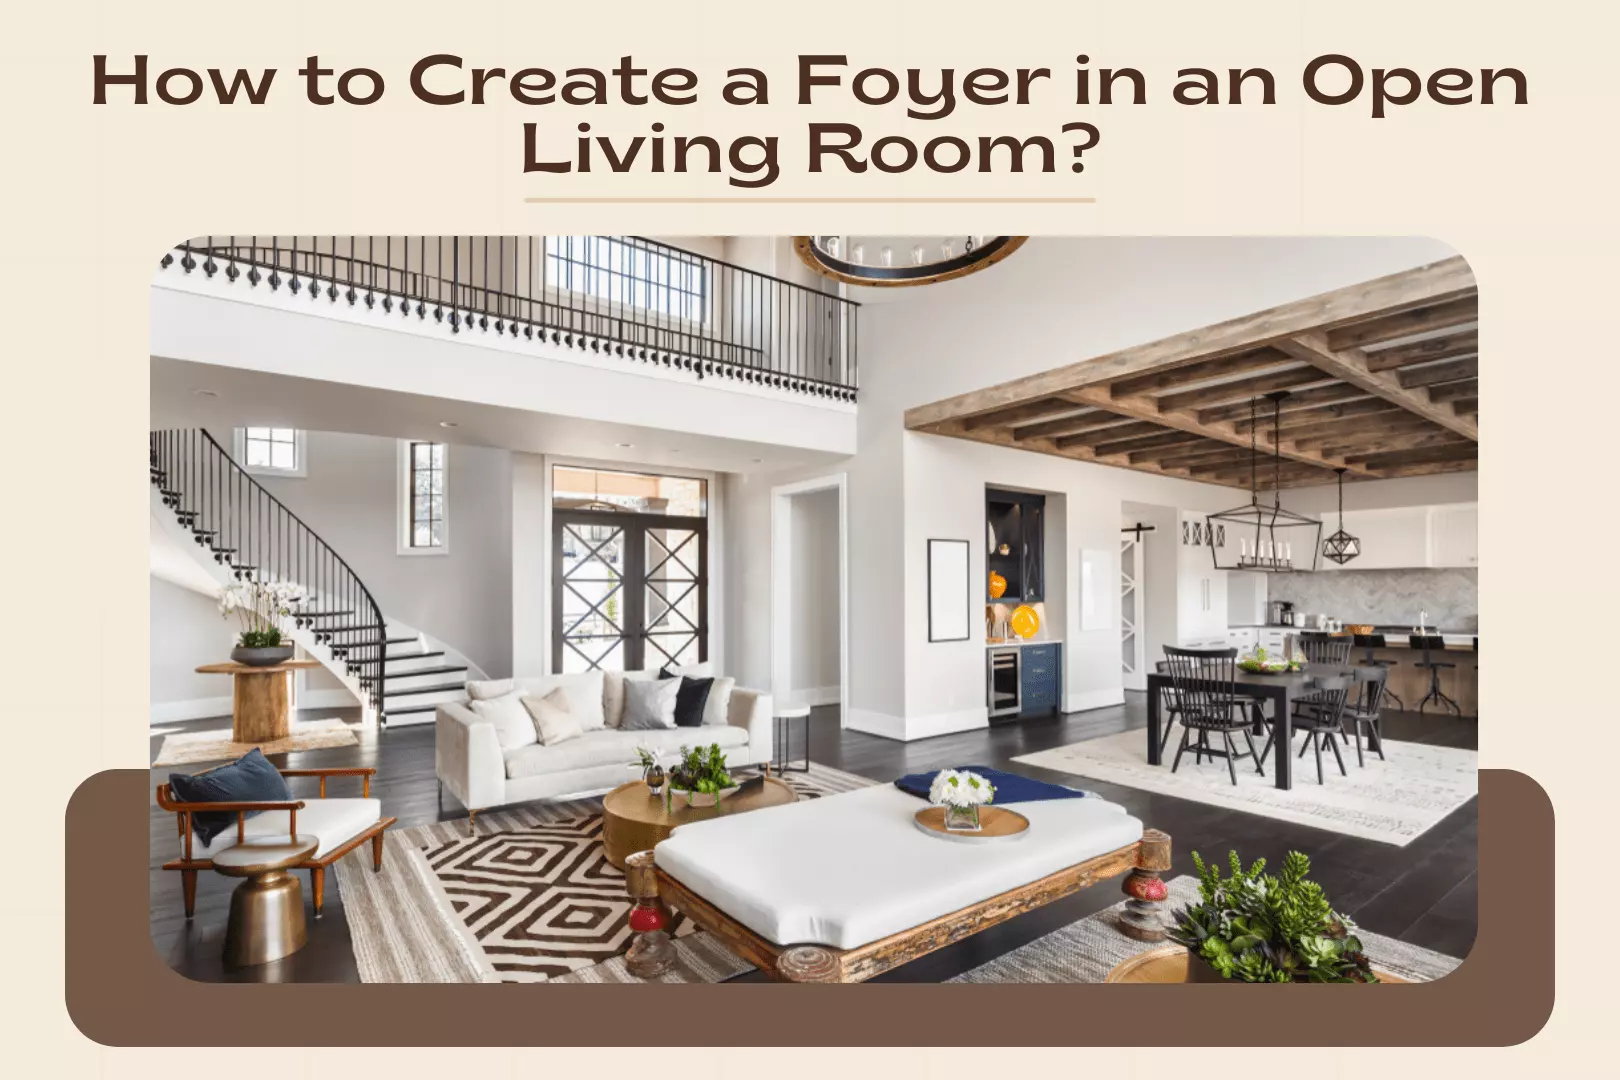 How to Create a Foyer in an Open Living Room Essential Steps and Tips